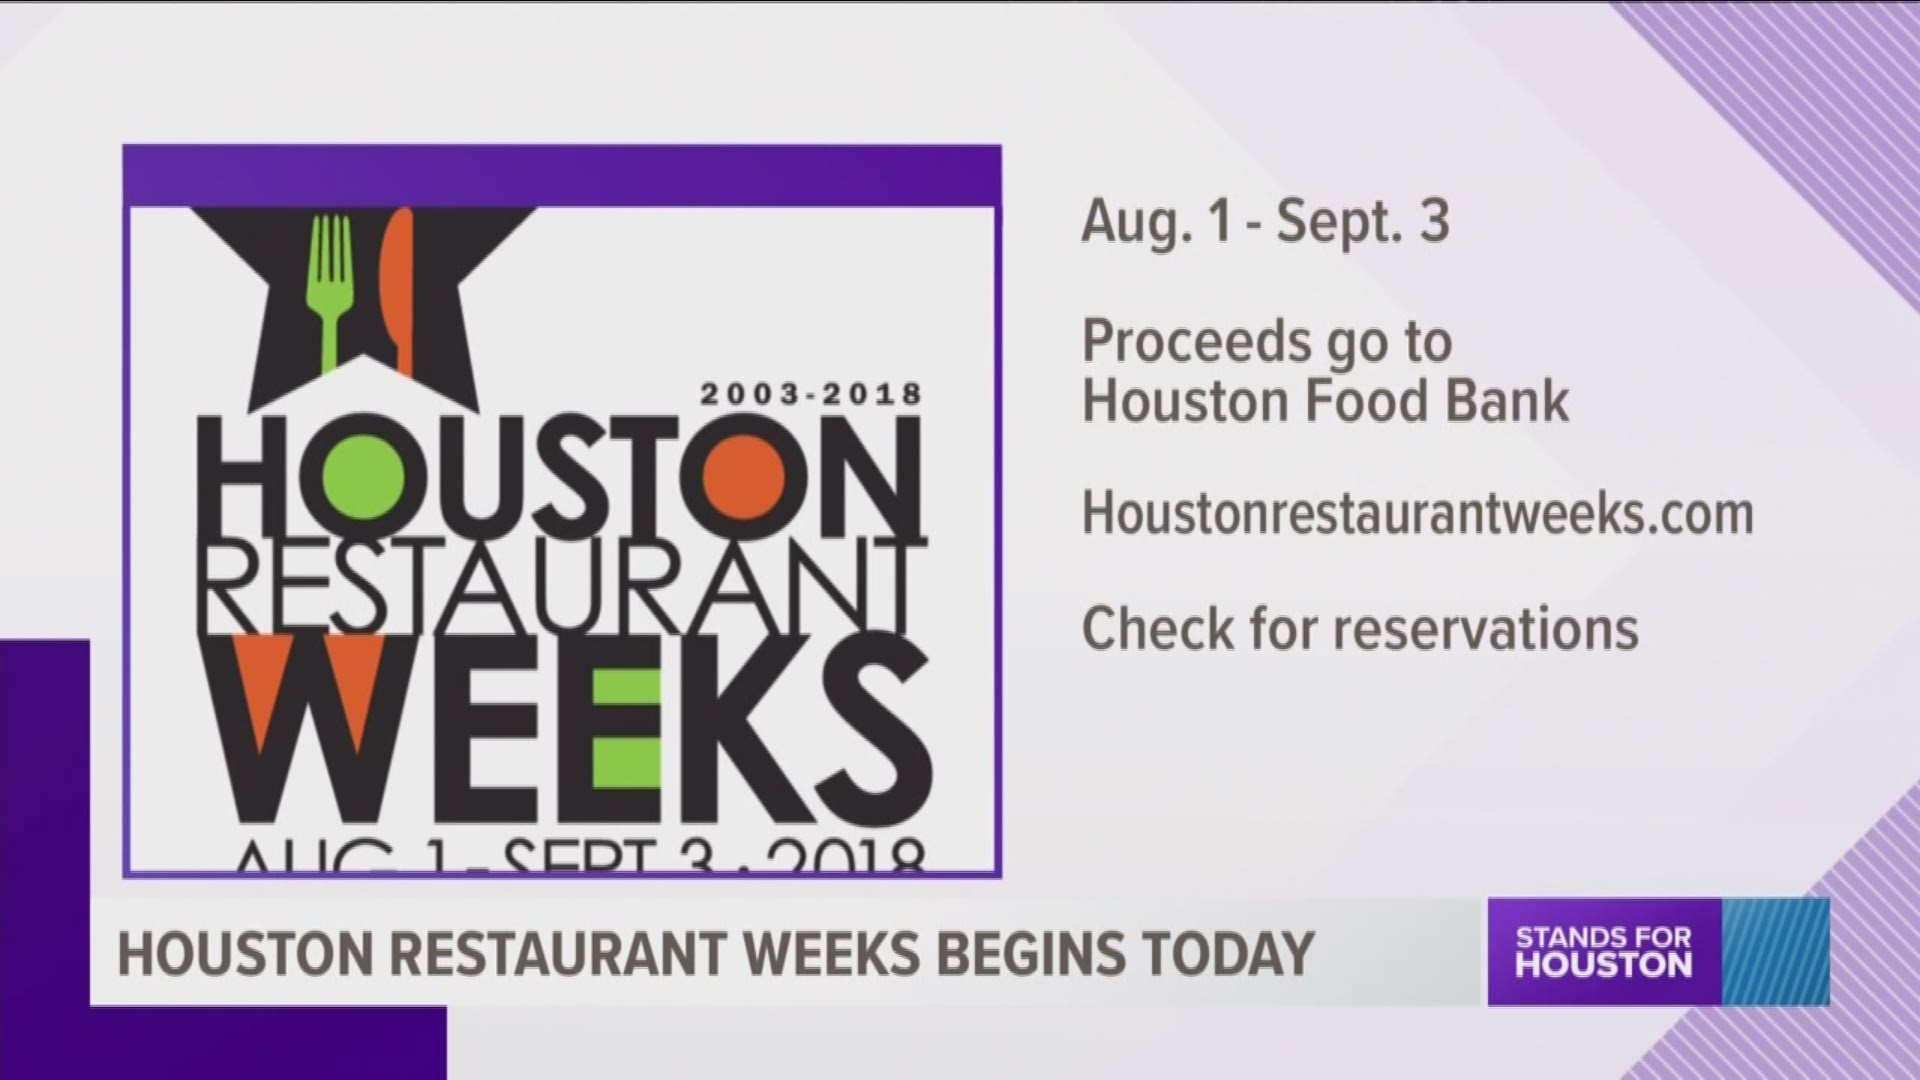 Houston Restaurant Weeks officially kicked off on Wednesday. Over the next month, those who want to dine out can enjoy gourmet fixed-price menu items at Houston's top restaurants. 